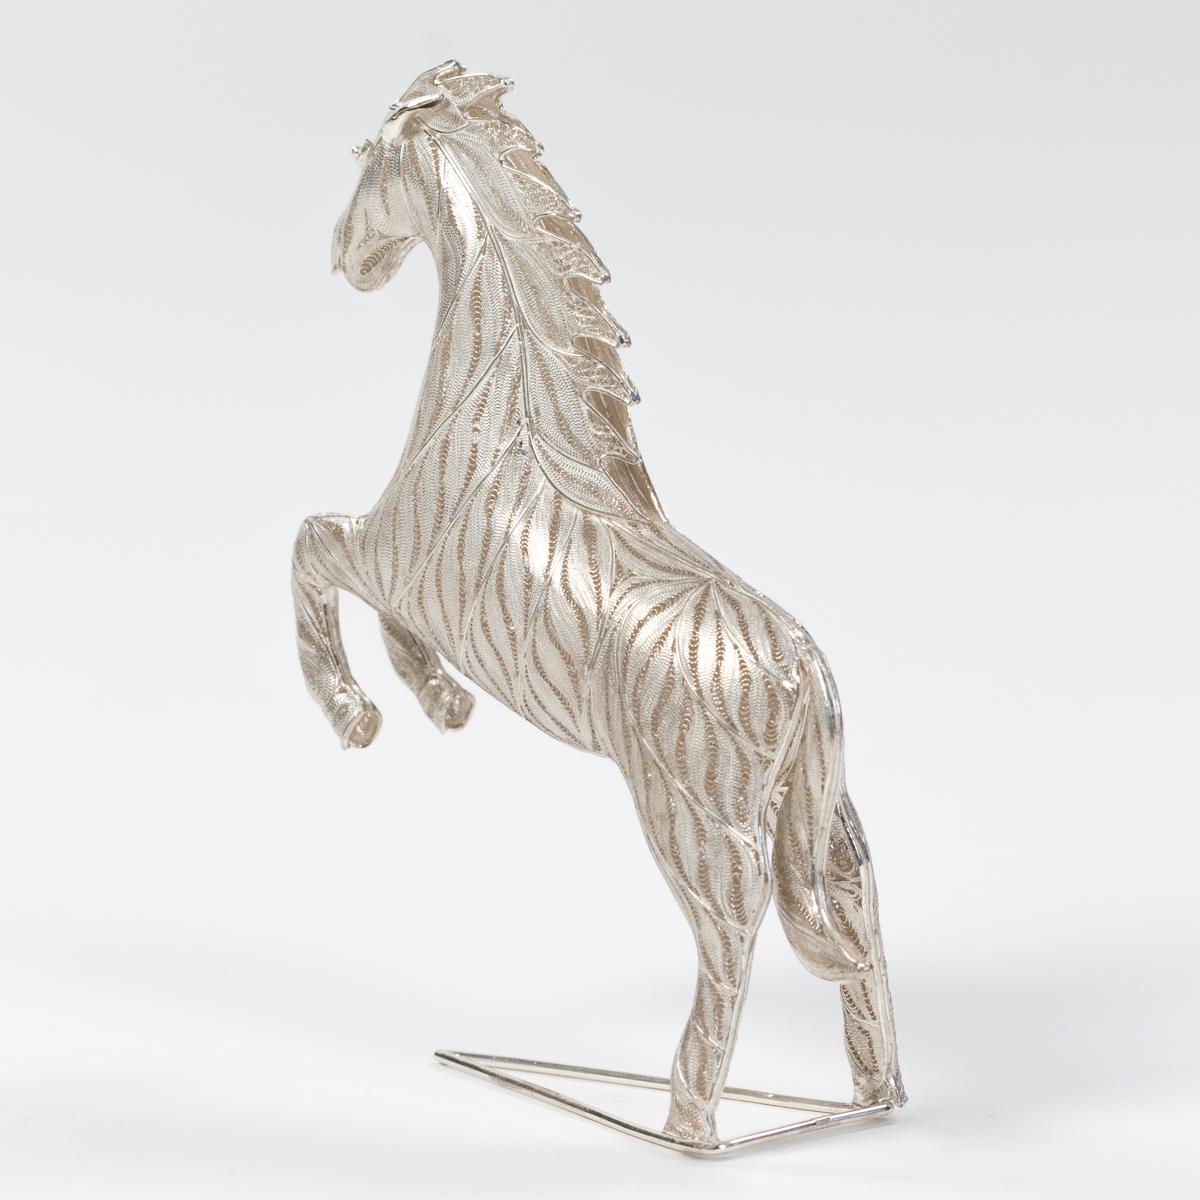 Jumping Horse Sculpture 925 Silver Handcrafted Filigree Technique Germany 2005 In New Condition For Sale In Salzburg, AT